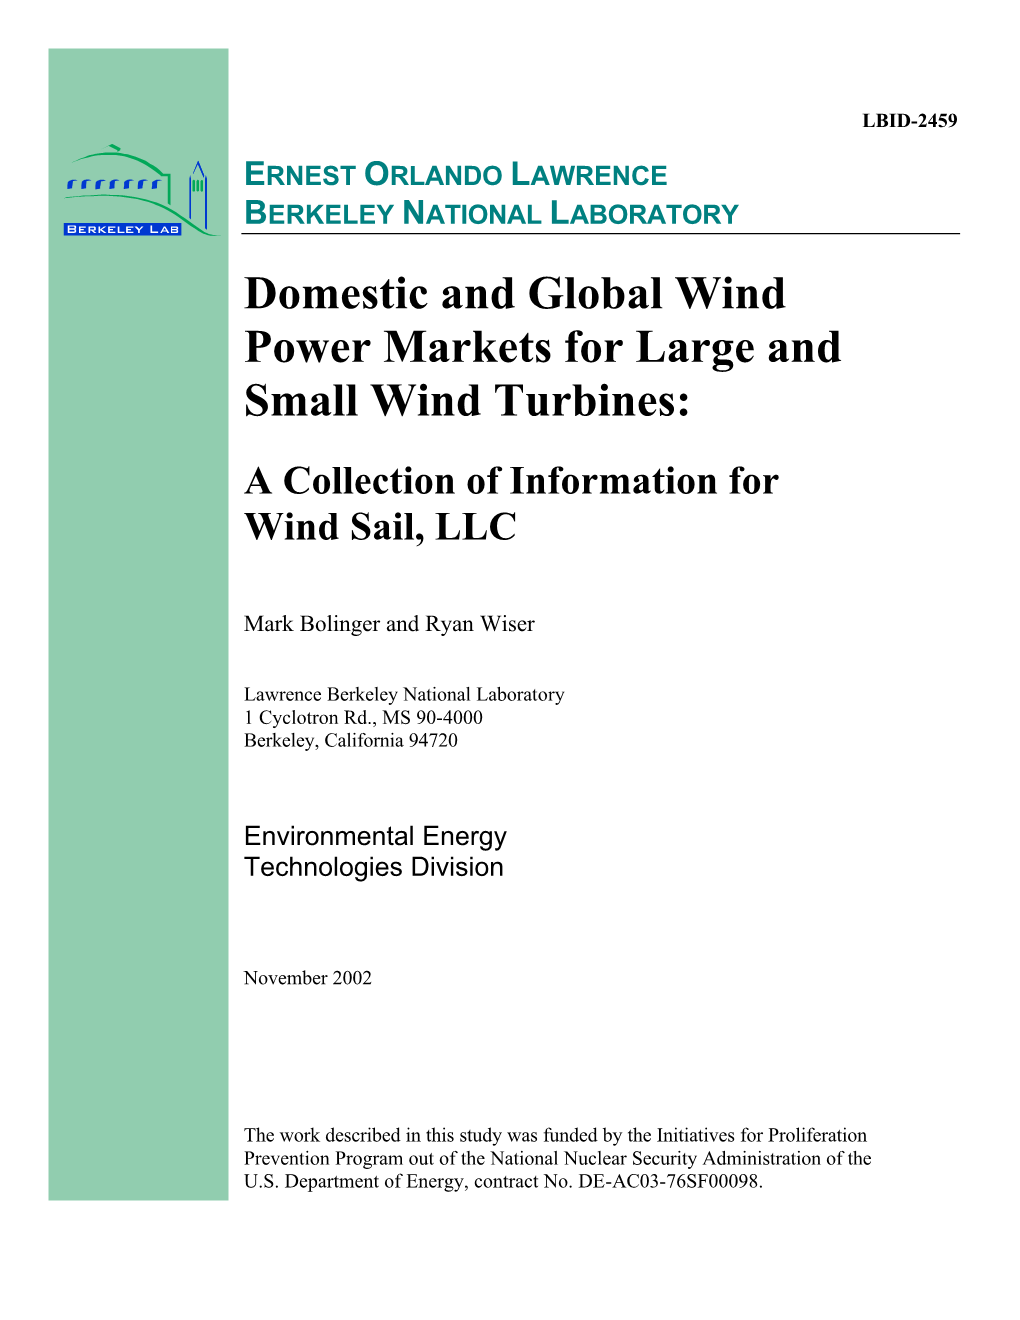 Domestic and Global Wind Power Markets for Large and Small Wind Turbines